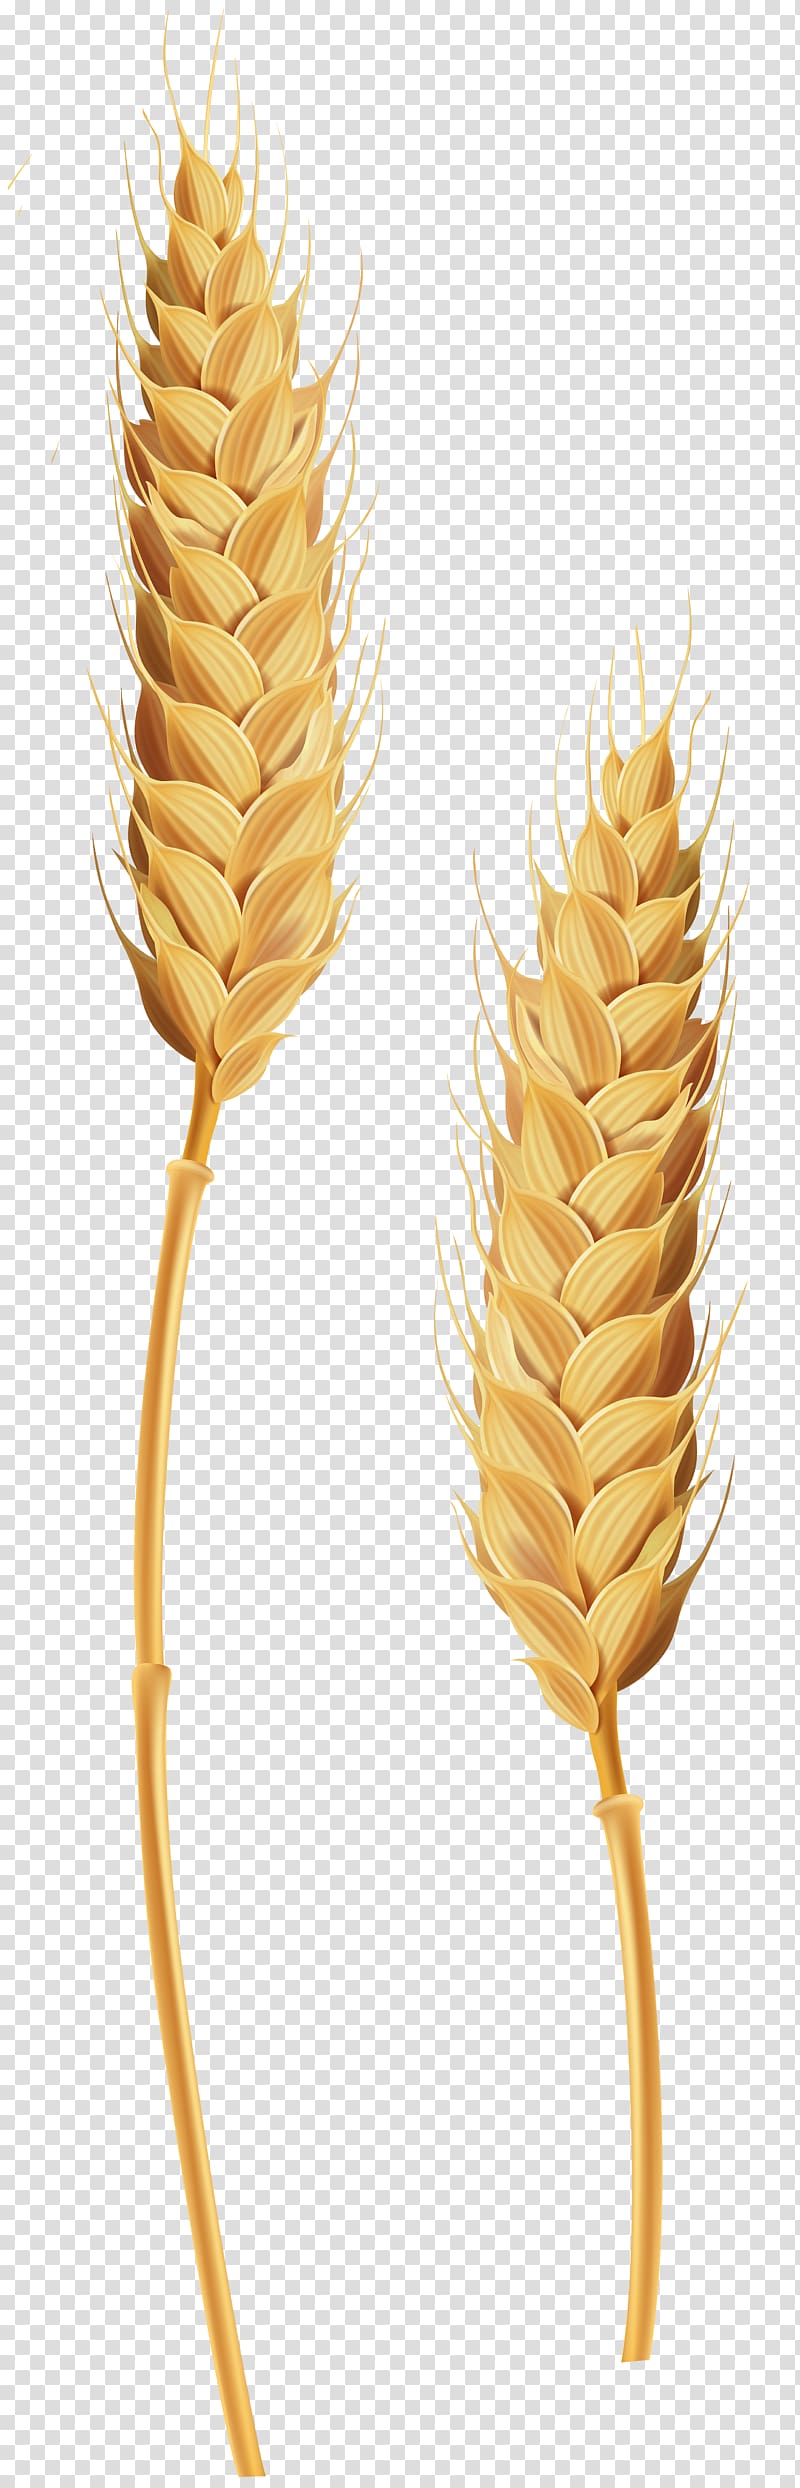 Wheatgrass Common wheat Wheat yellow rust Ear , golden wheat transparent background PNG clipart